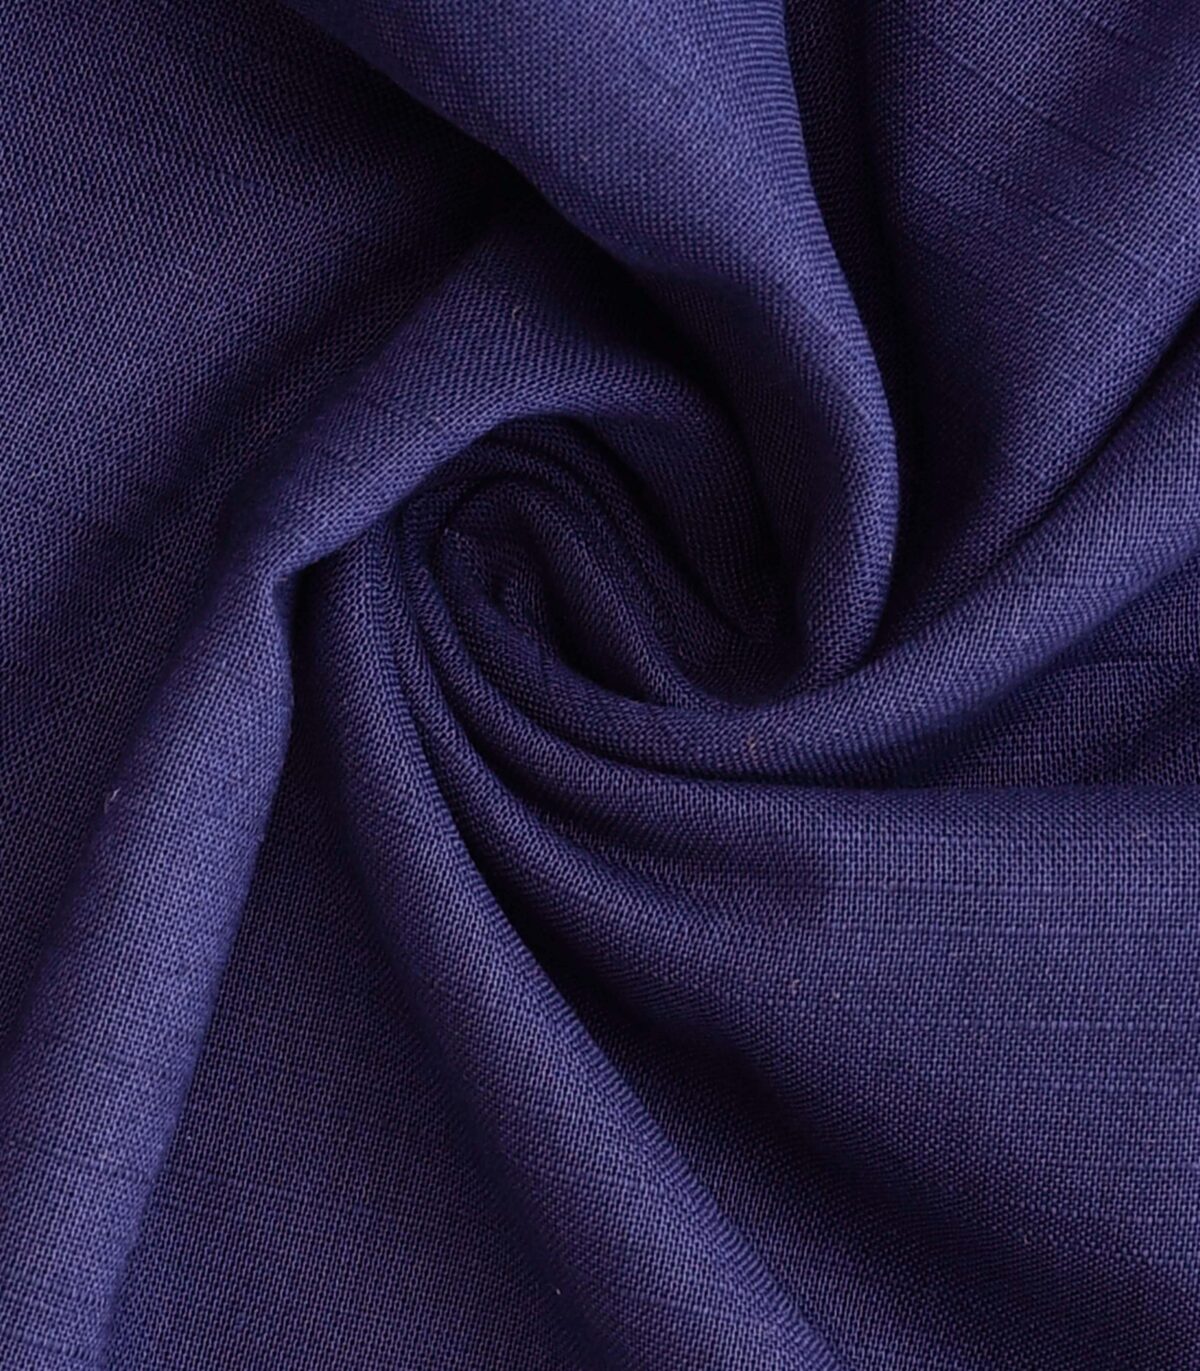 Cotton Navy Blue Dyed Woven Fabric